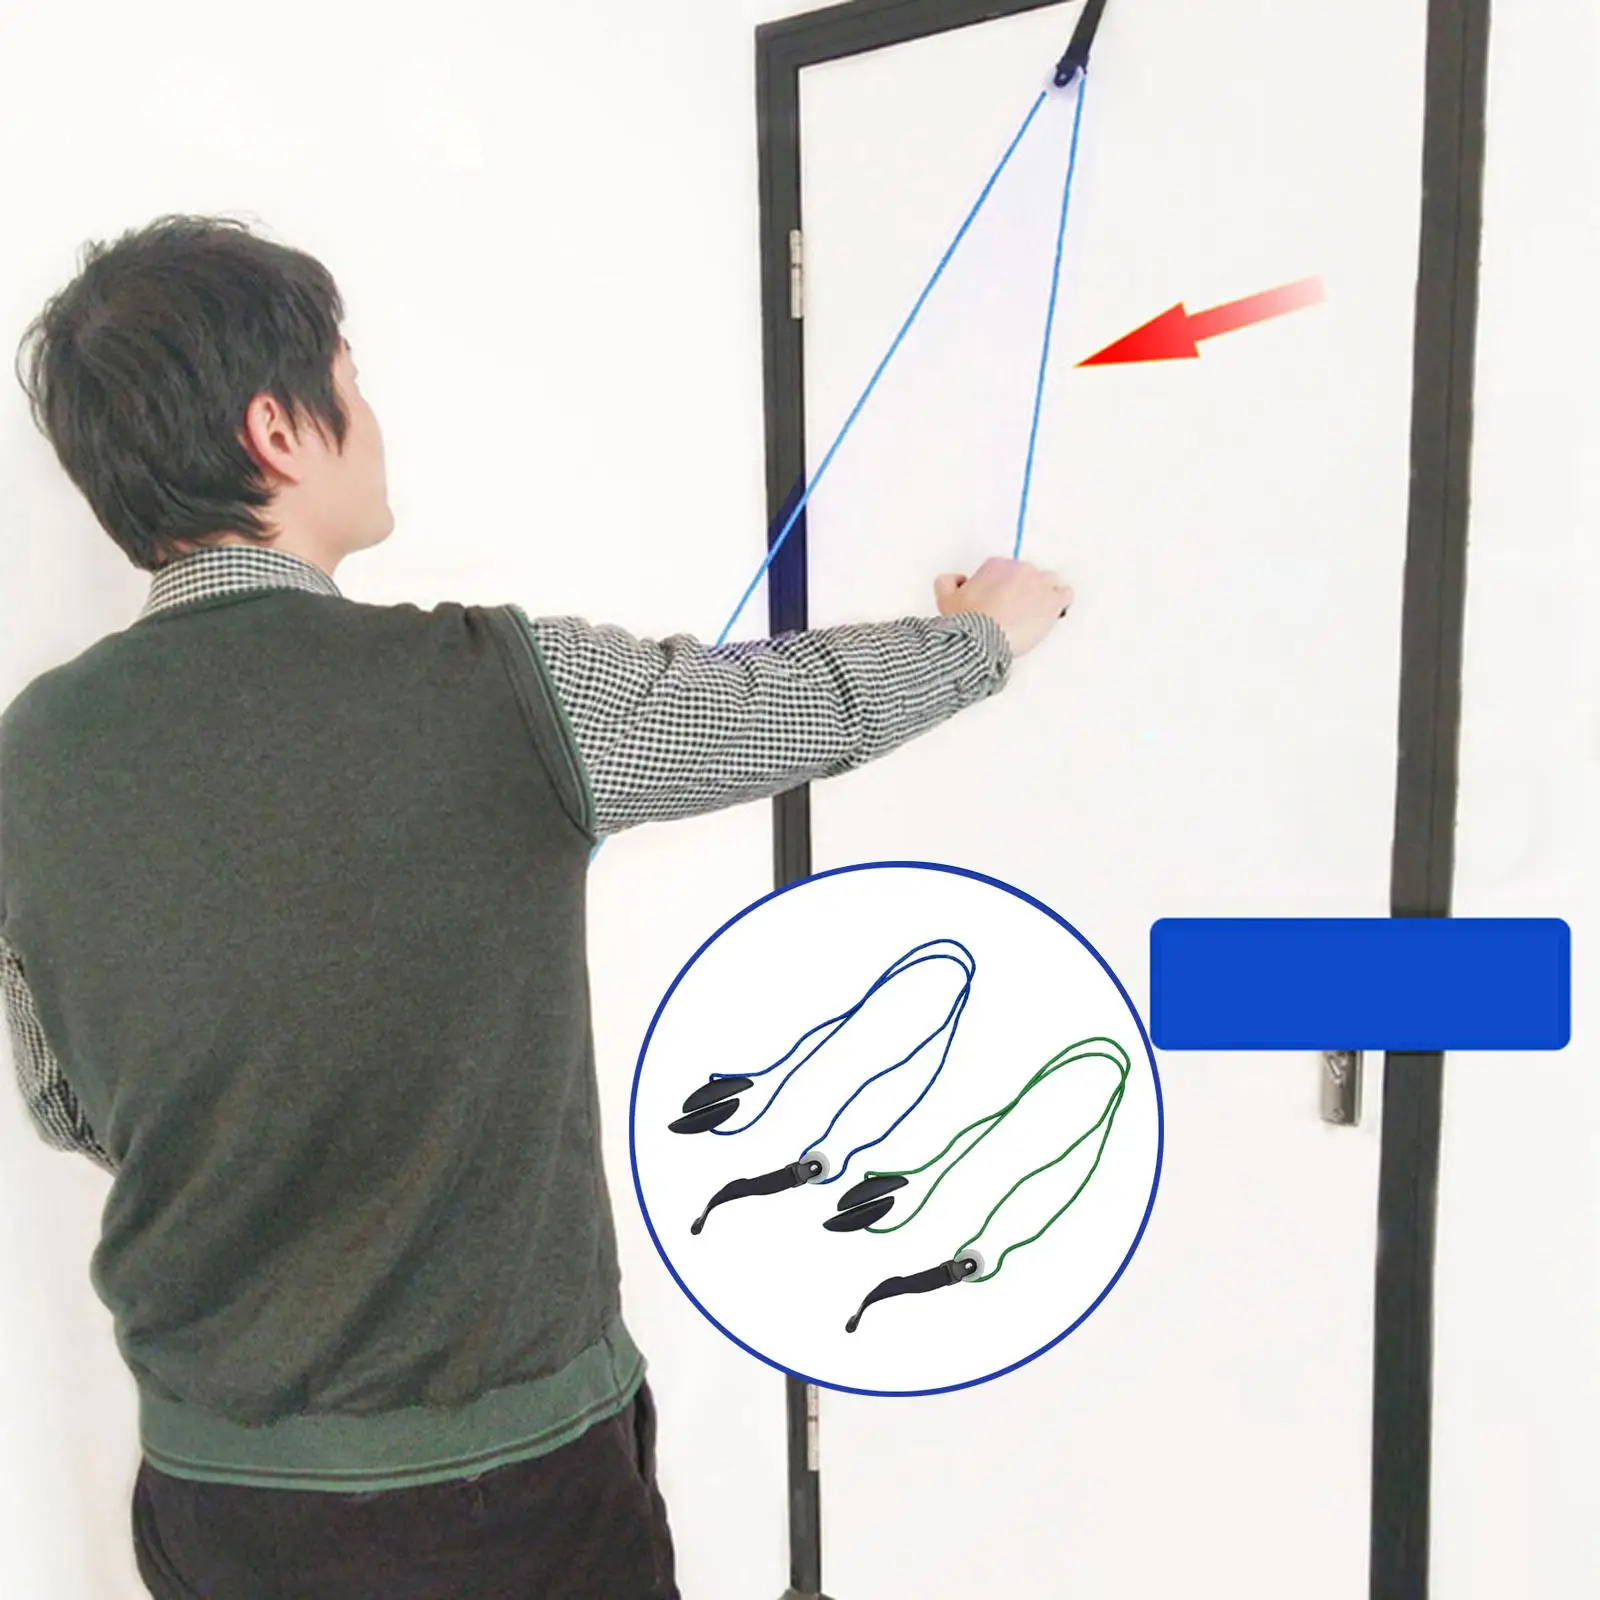  Pulley Over The Door Arm Exercise Rope Flexibility for Sports Device